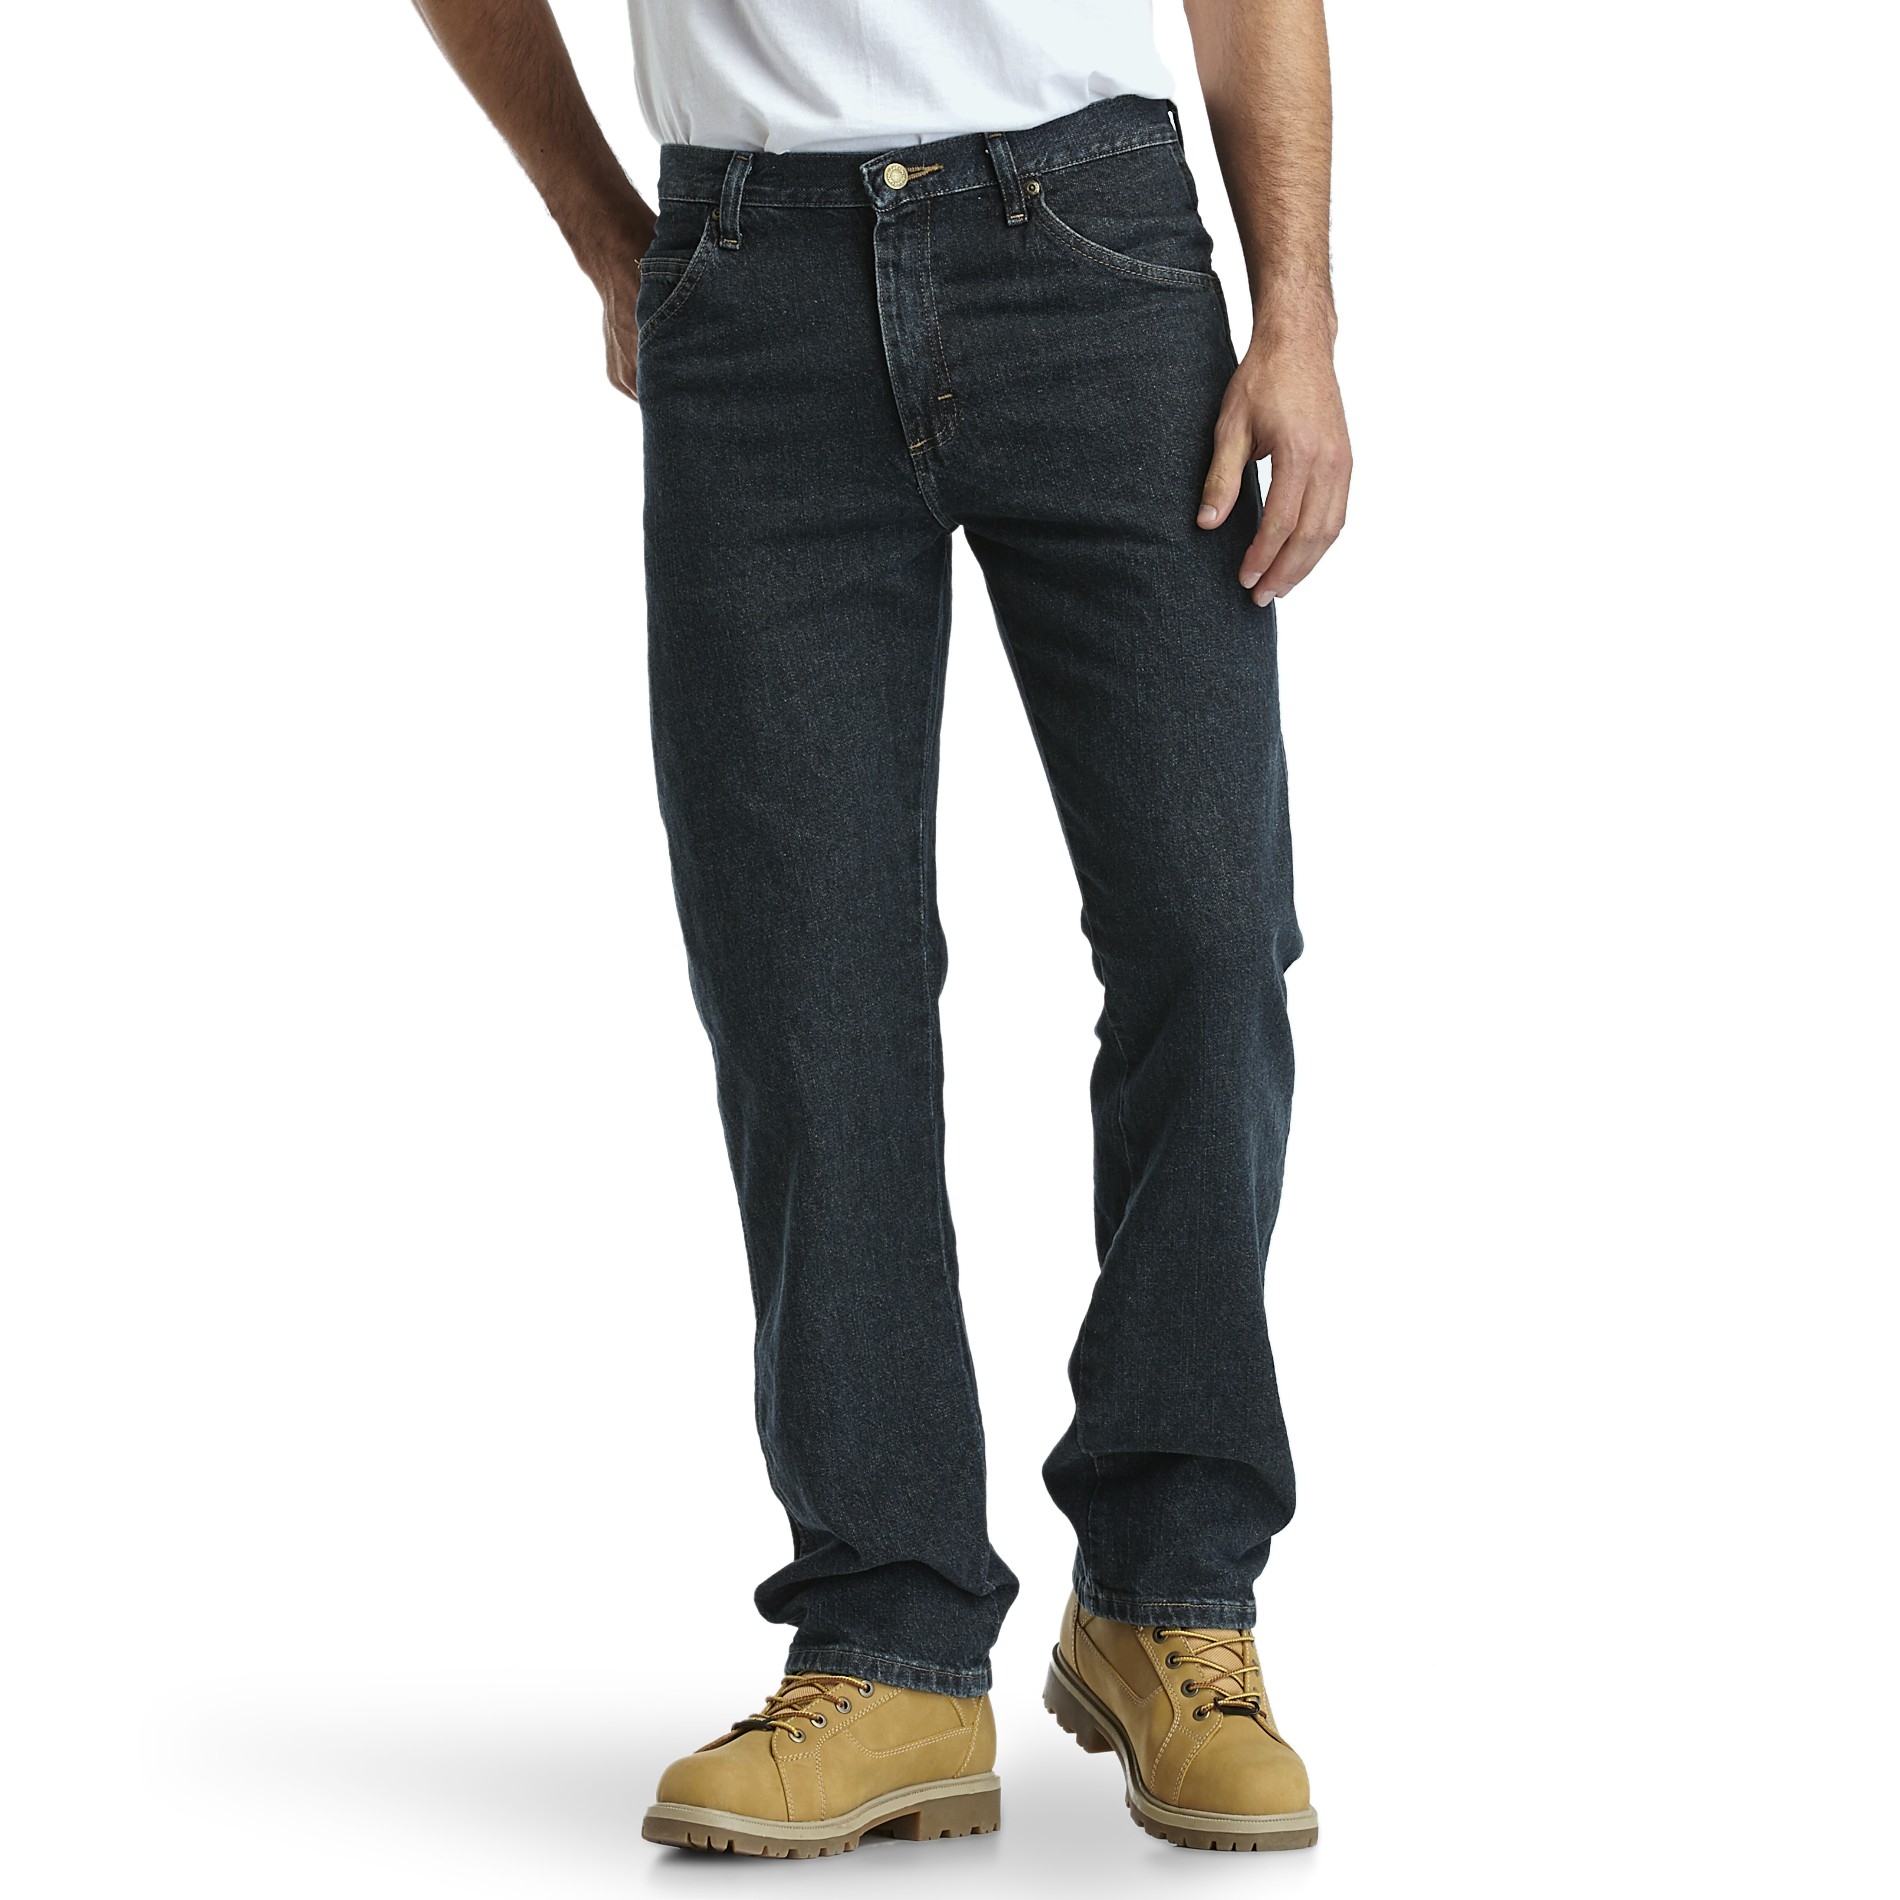 kmart mens jeans big and tall